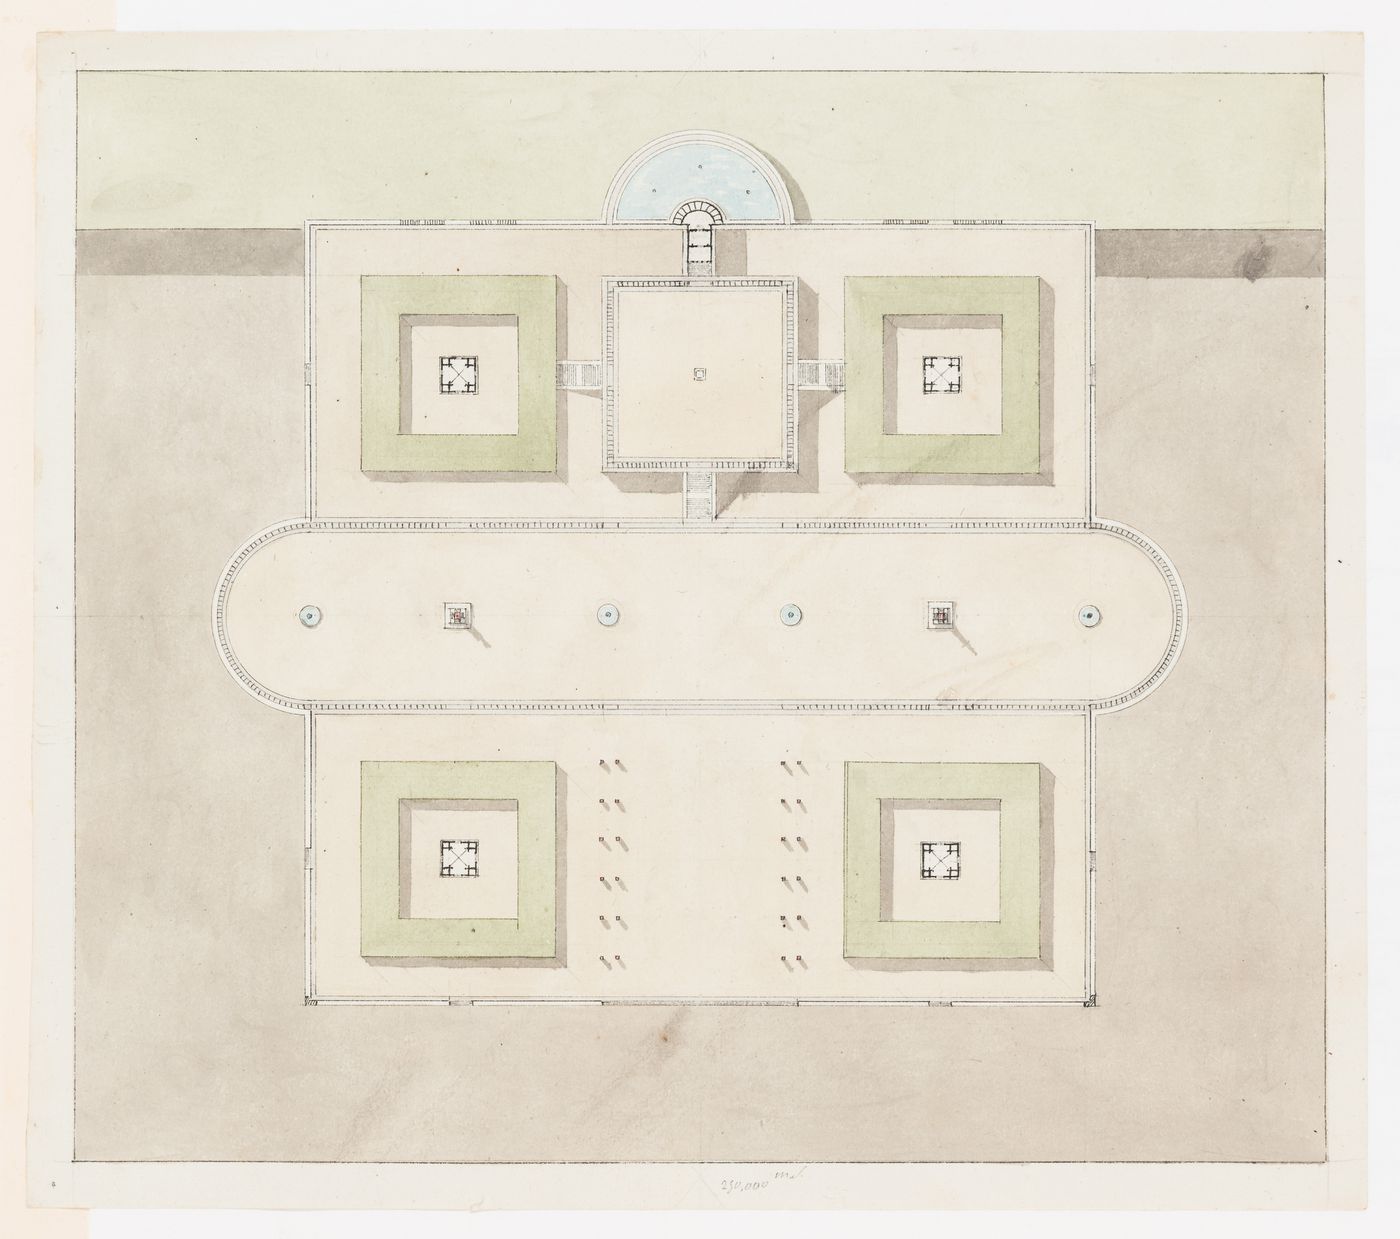 Elevation and plans for public fairs, perhaps studies for the 1802 Grand Prix Competition; verso: 1800 Concours d'essai: Programme, elevation, section and plans for a navigation school